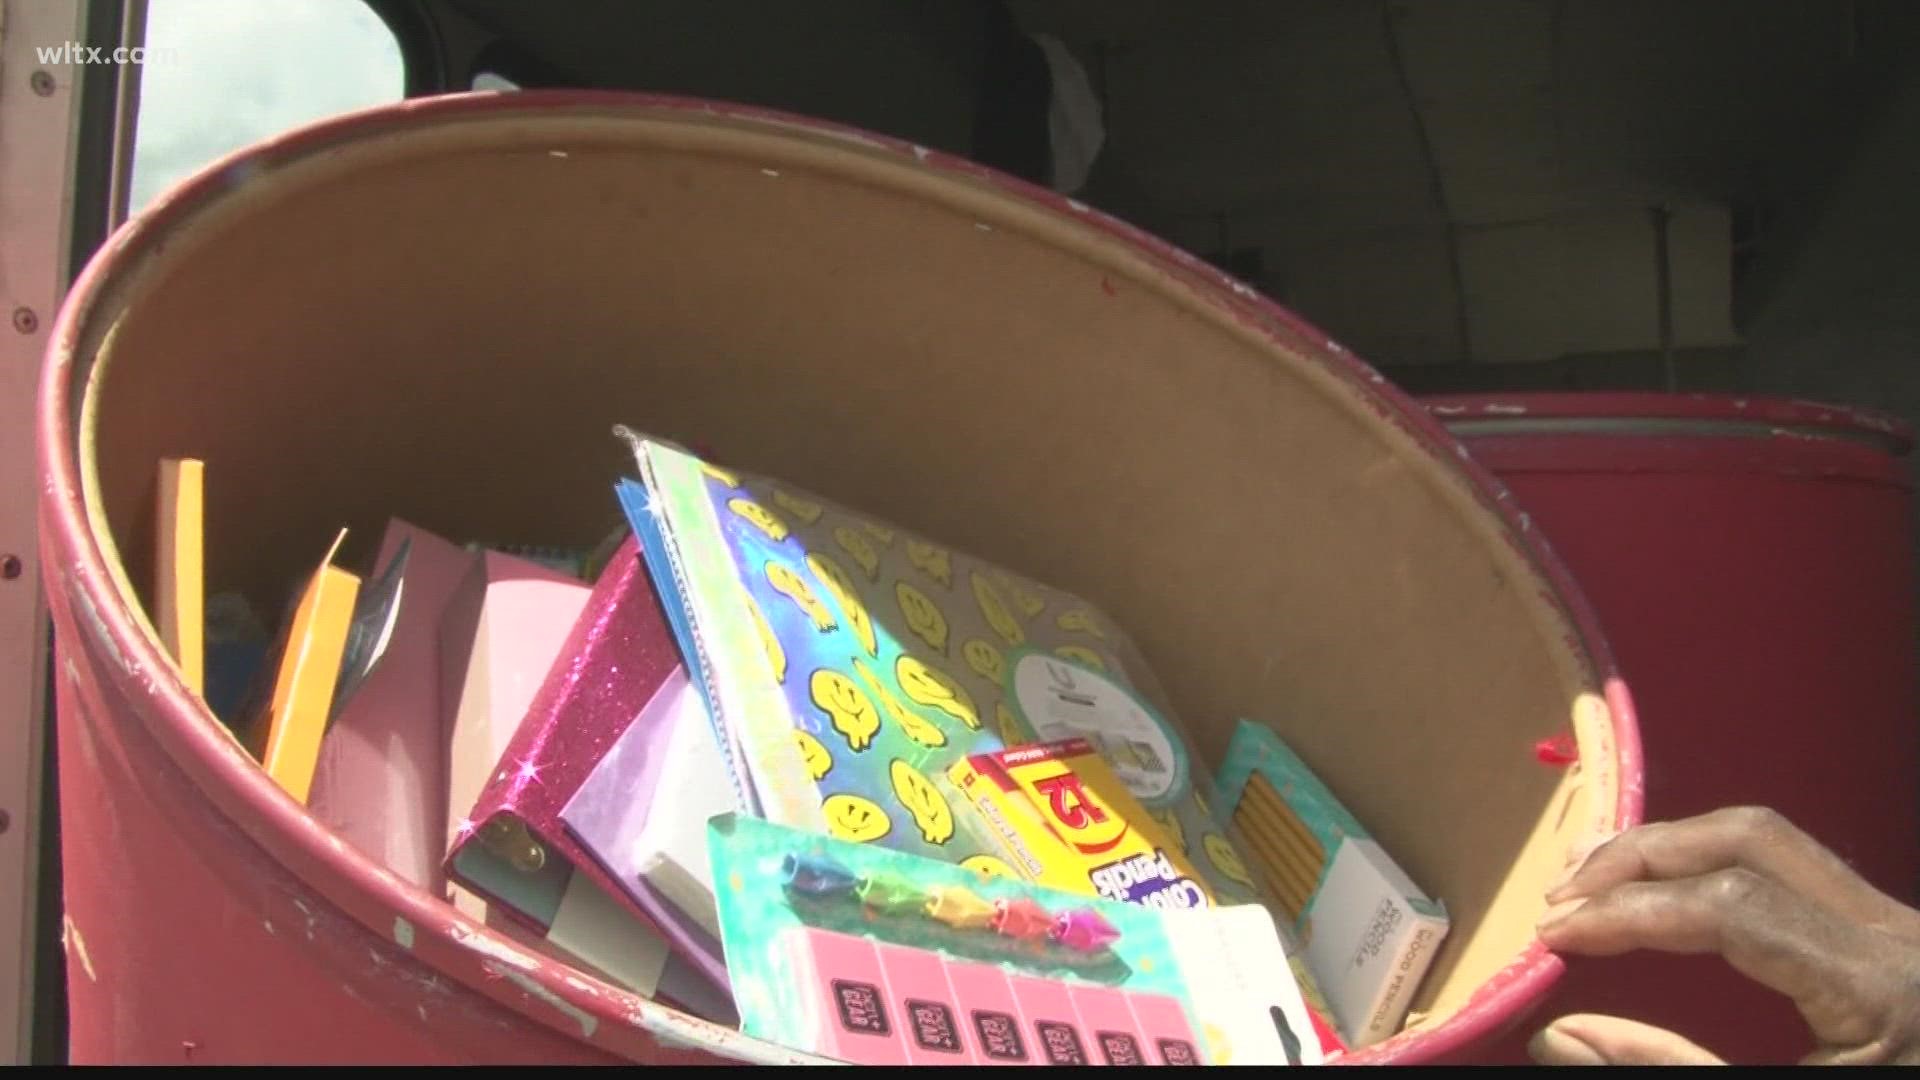 The Salvation Army in partnership with WLTX has been collecting school supplies from around the community for weeks.